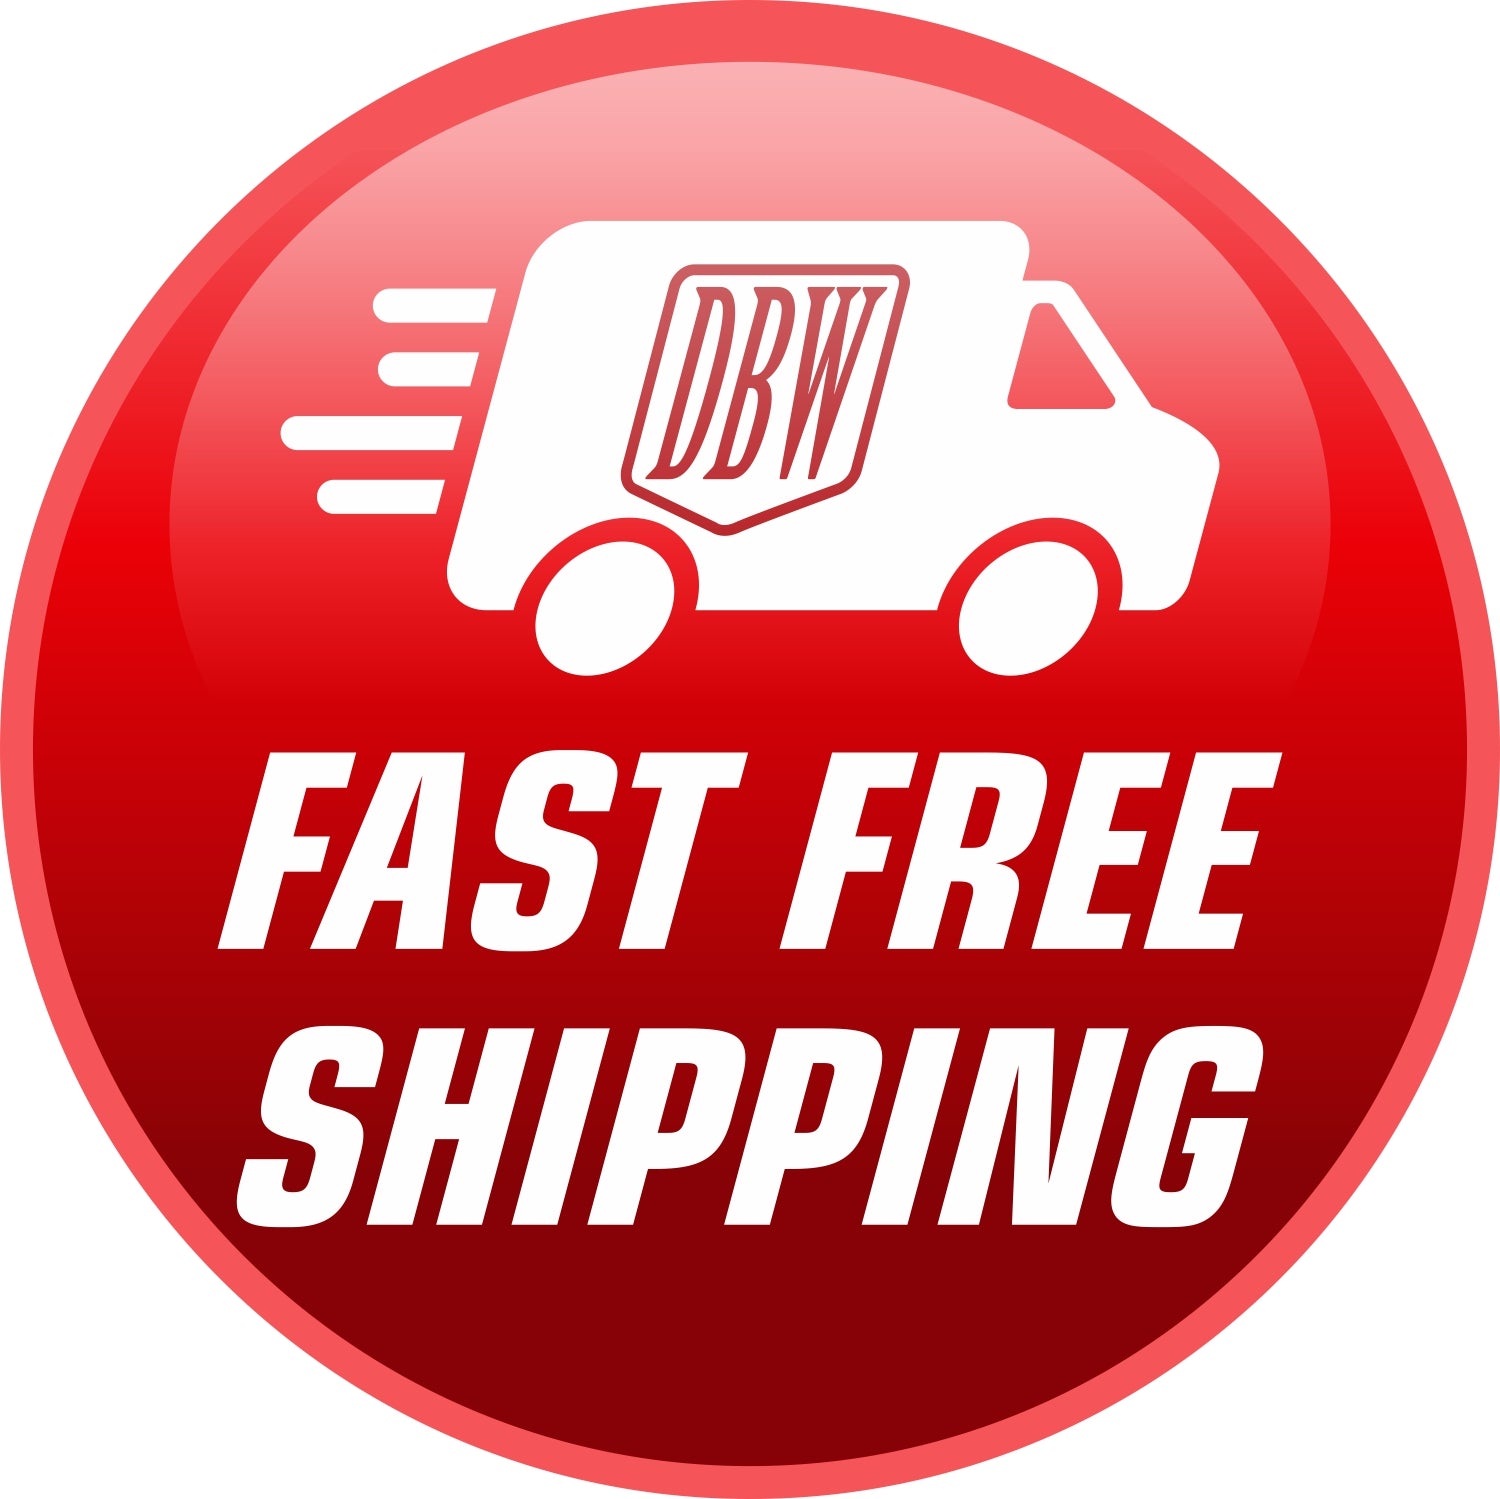 Free Shipping On All Orders